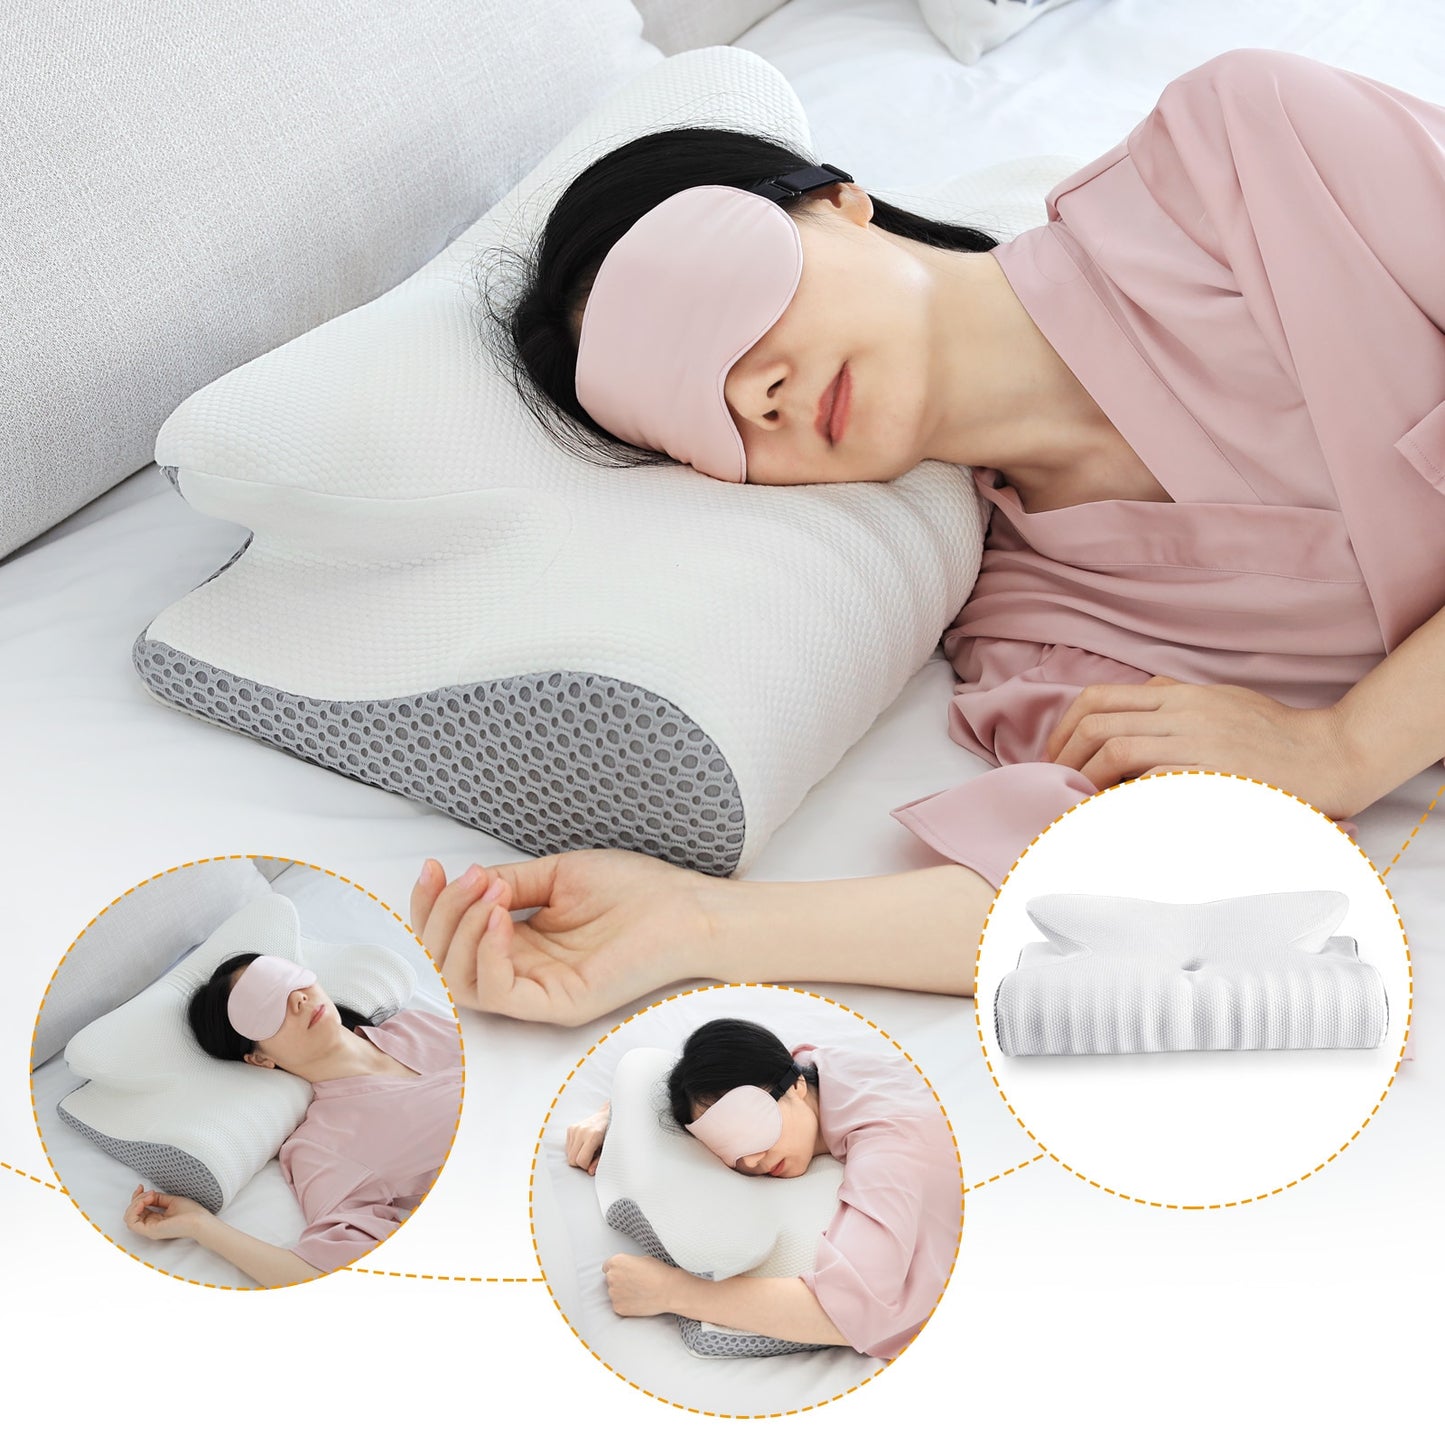 Fuloon Contour Memory Foam Neck Pillow Ergonomic Orthopedic Neck Pain Pillow for Side Back Stomach Sleeper Remedial Pillow